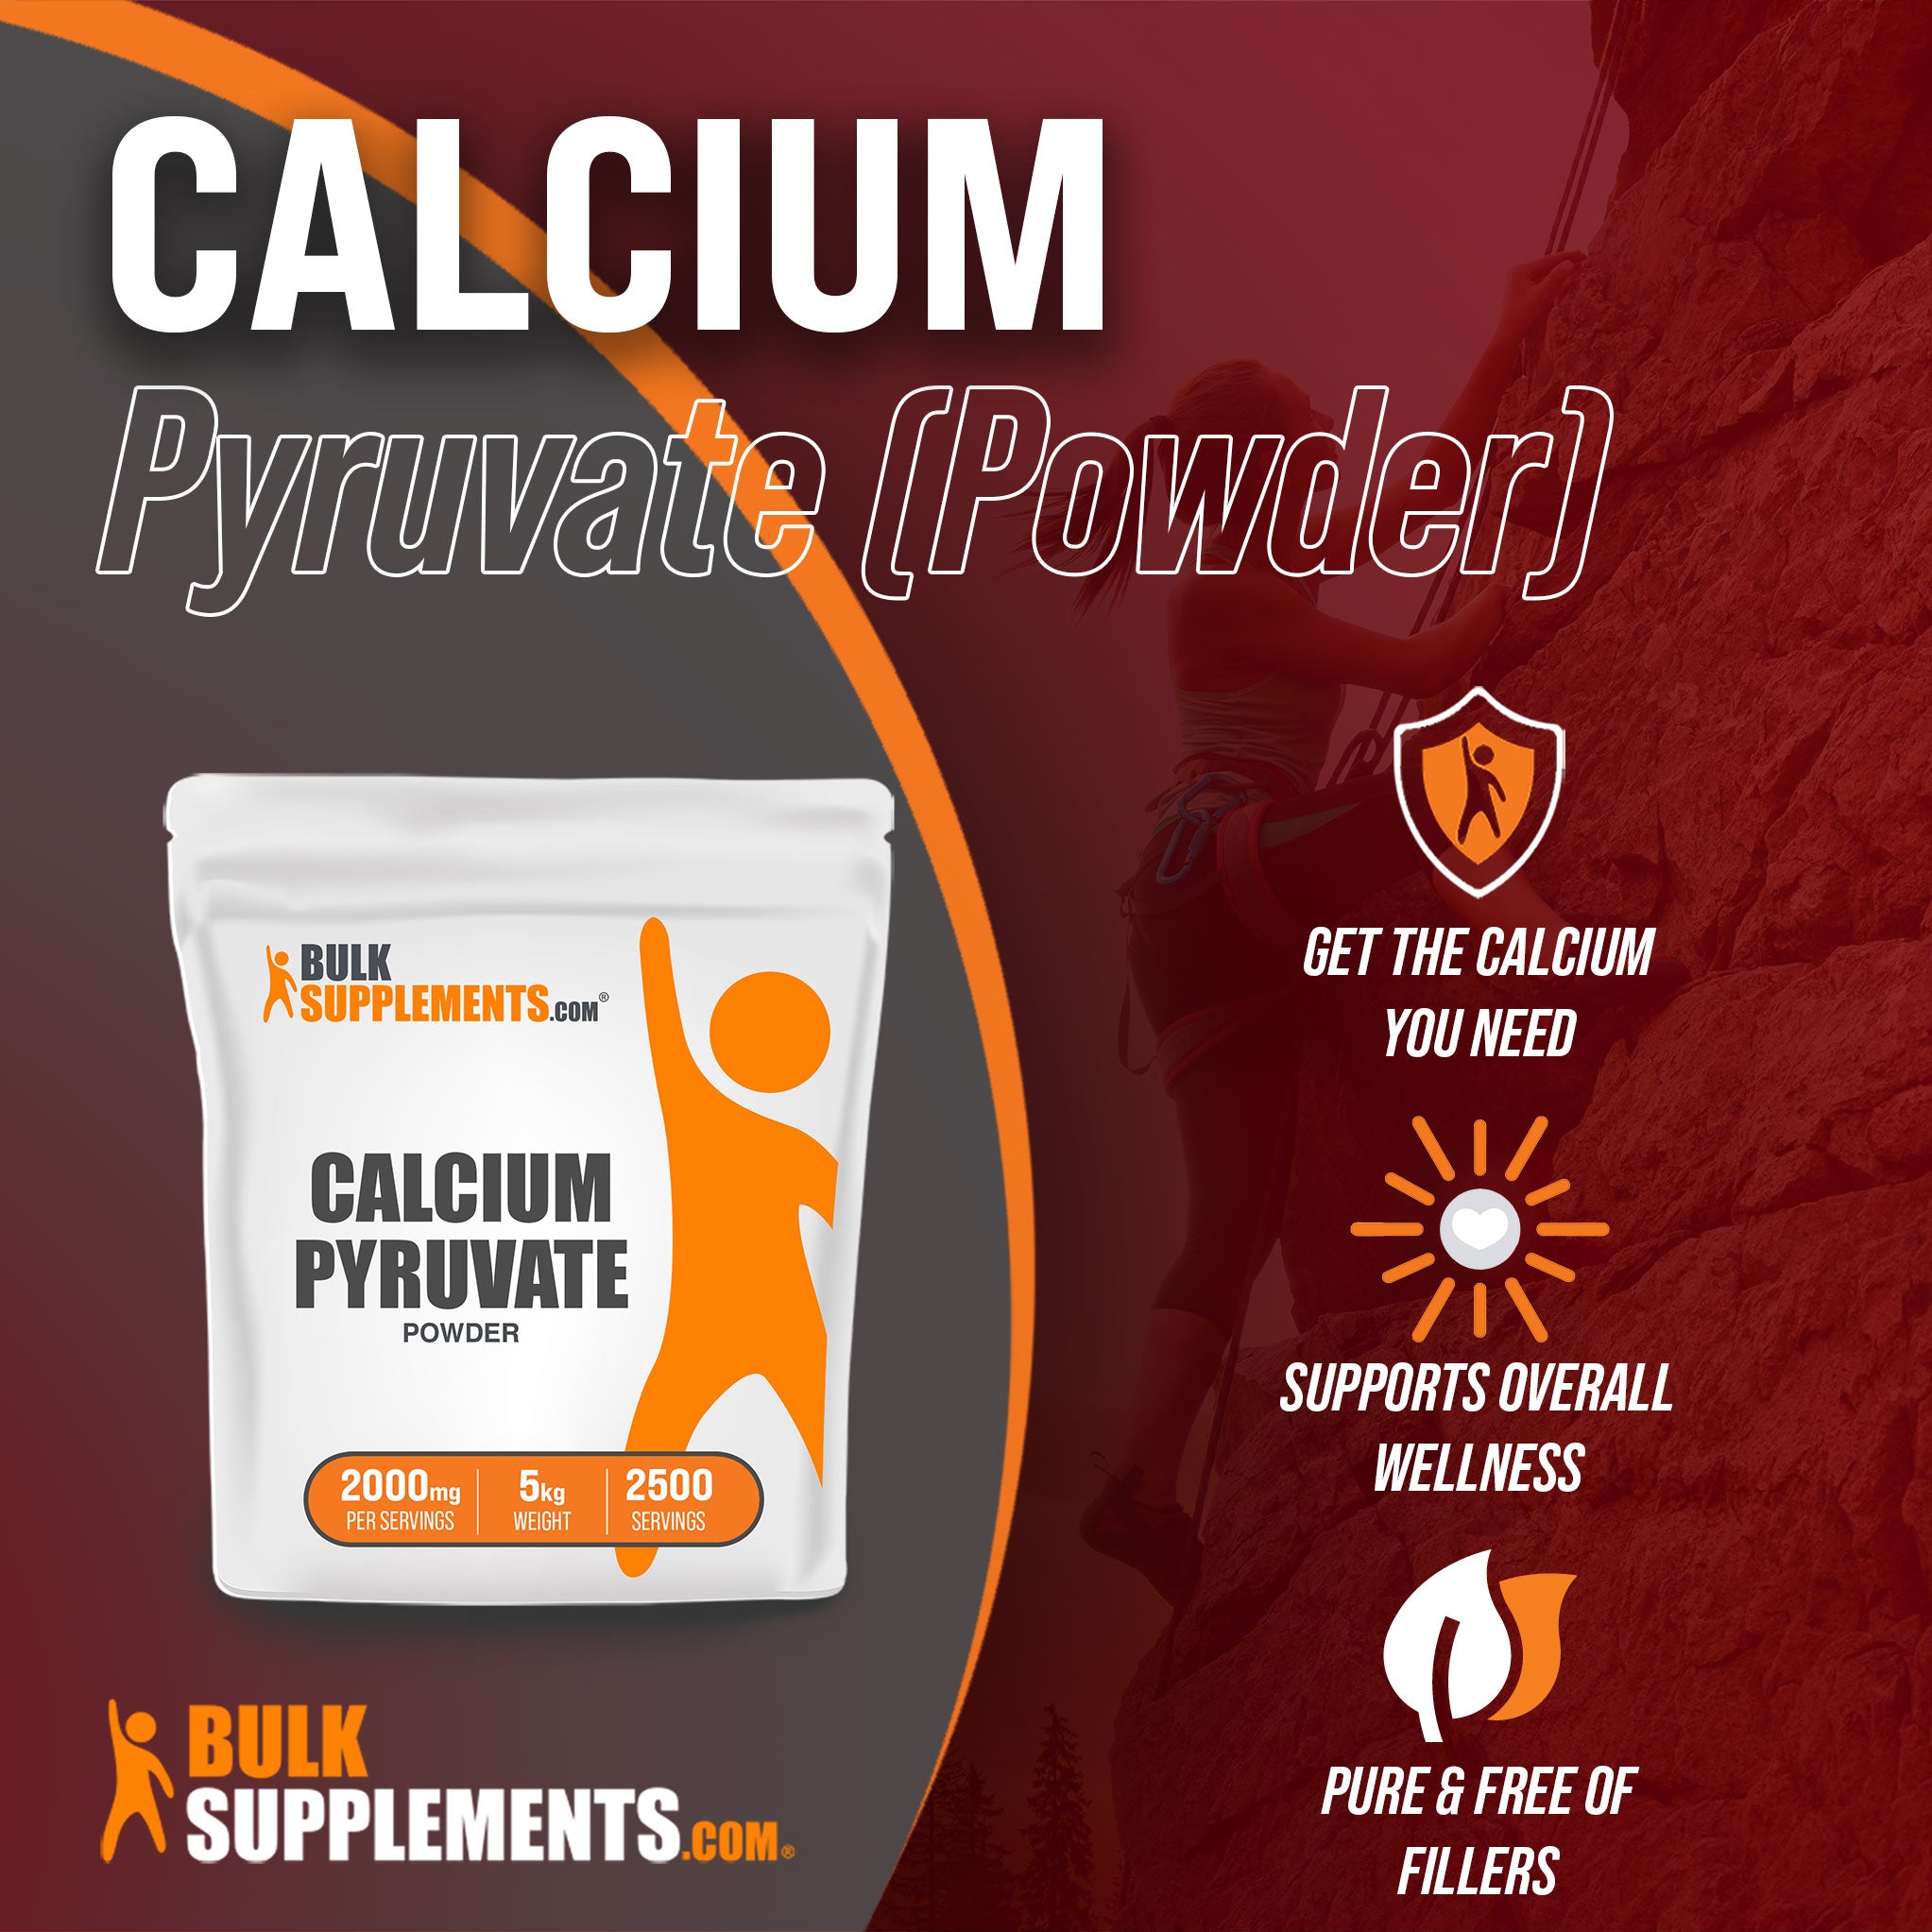 Our 5kg calcium pyruvate supplements are pure and filler free